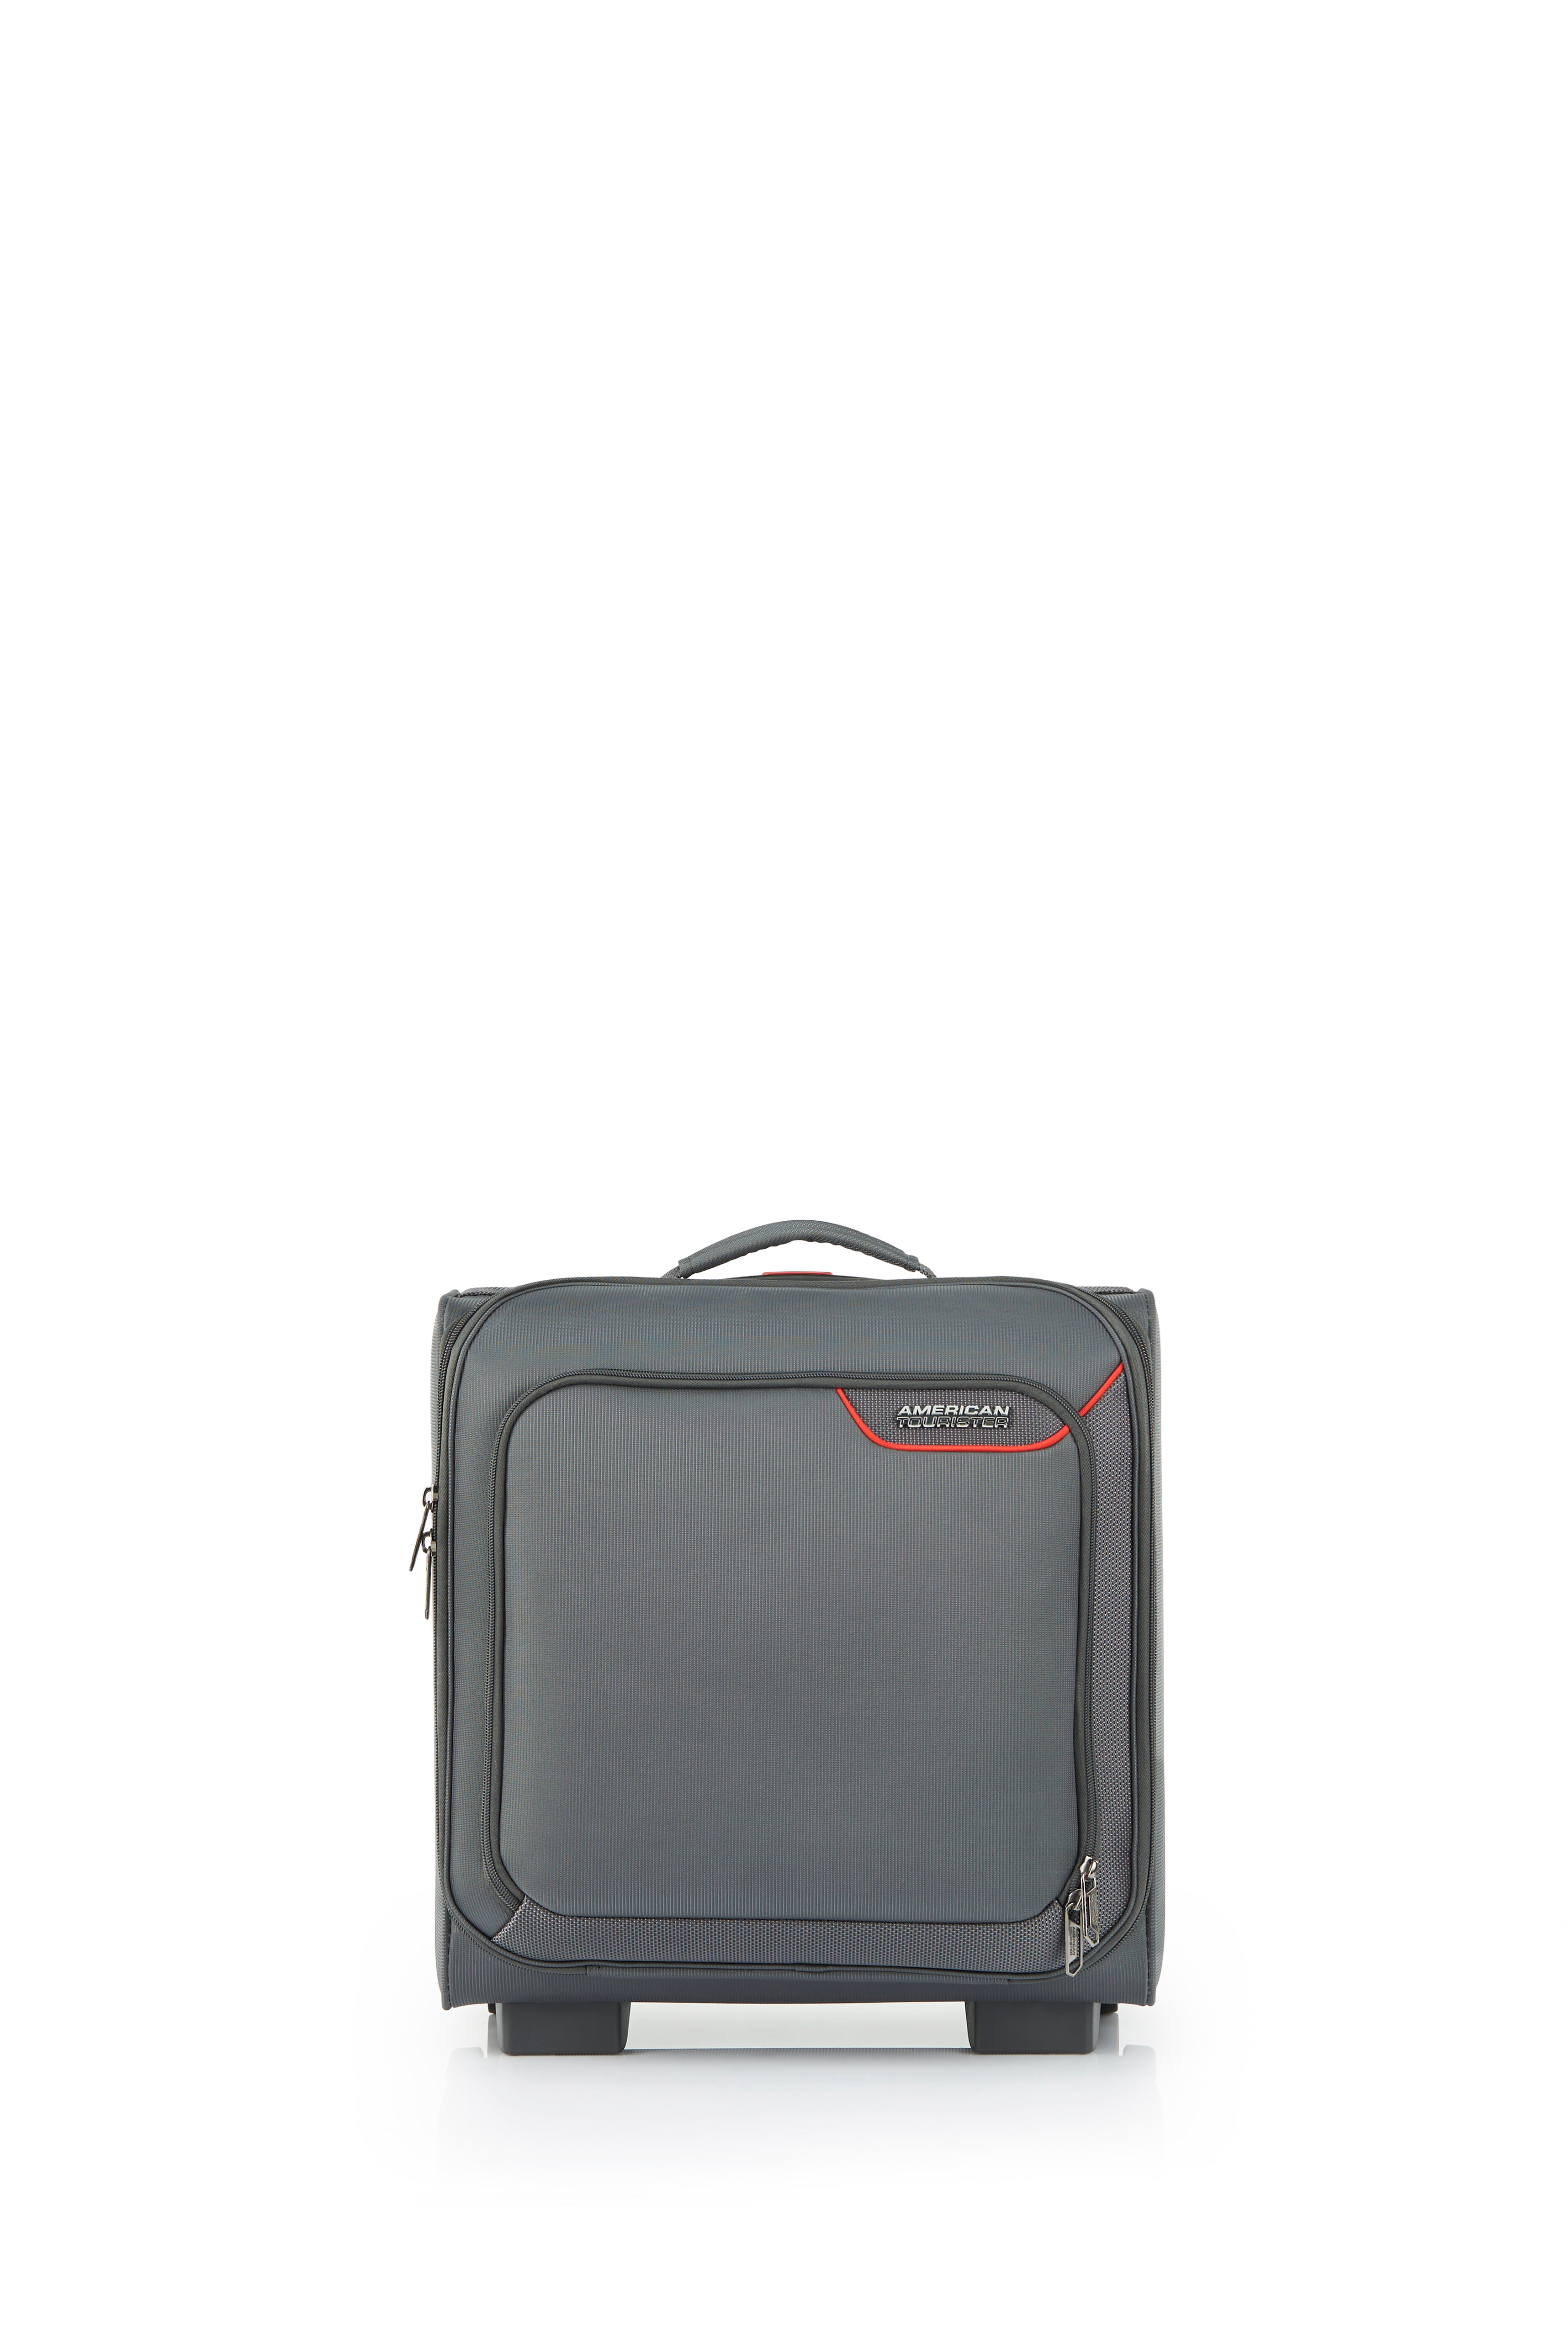 American Tourister - Applite ECO Underseater Suitcase - Grey/Red-2